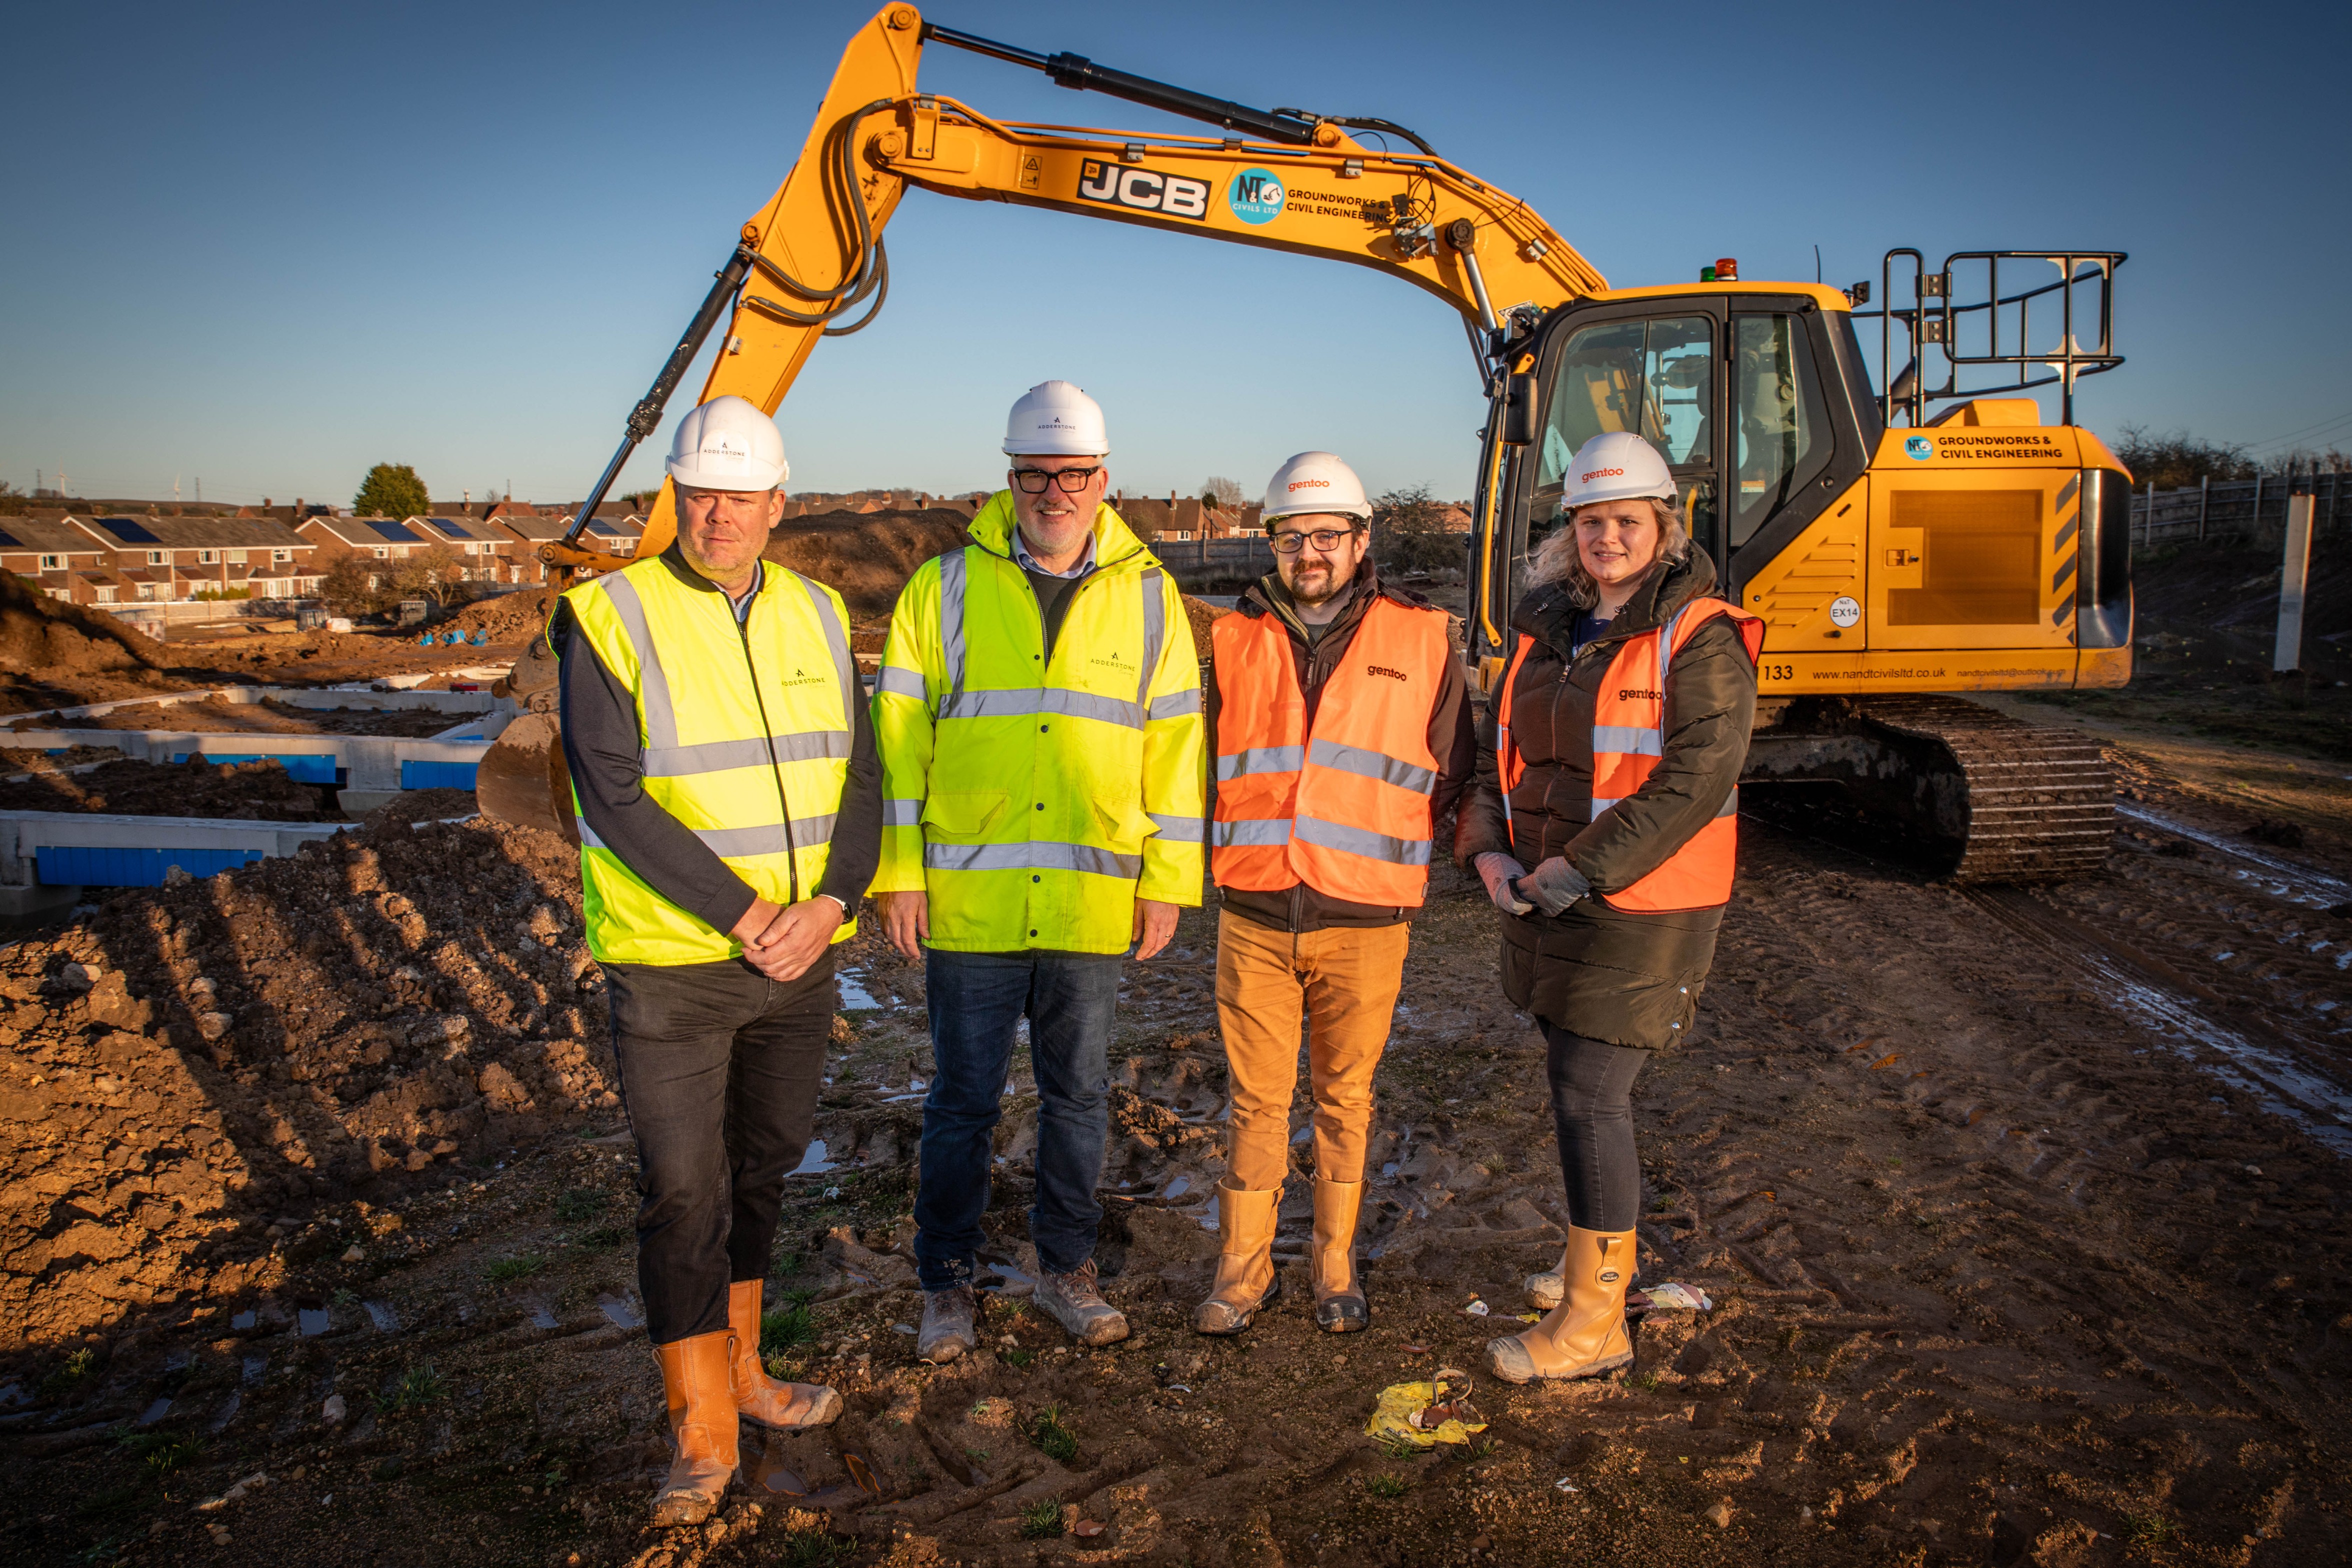 Four people stood on a building site with digger in background